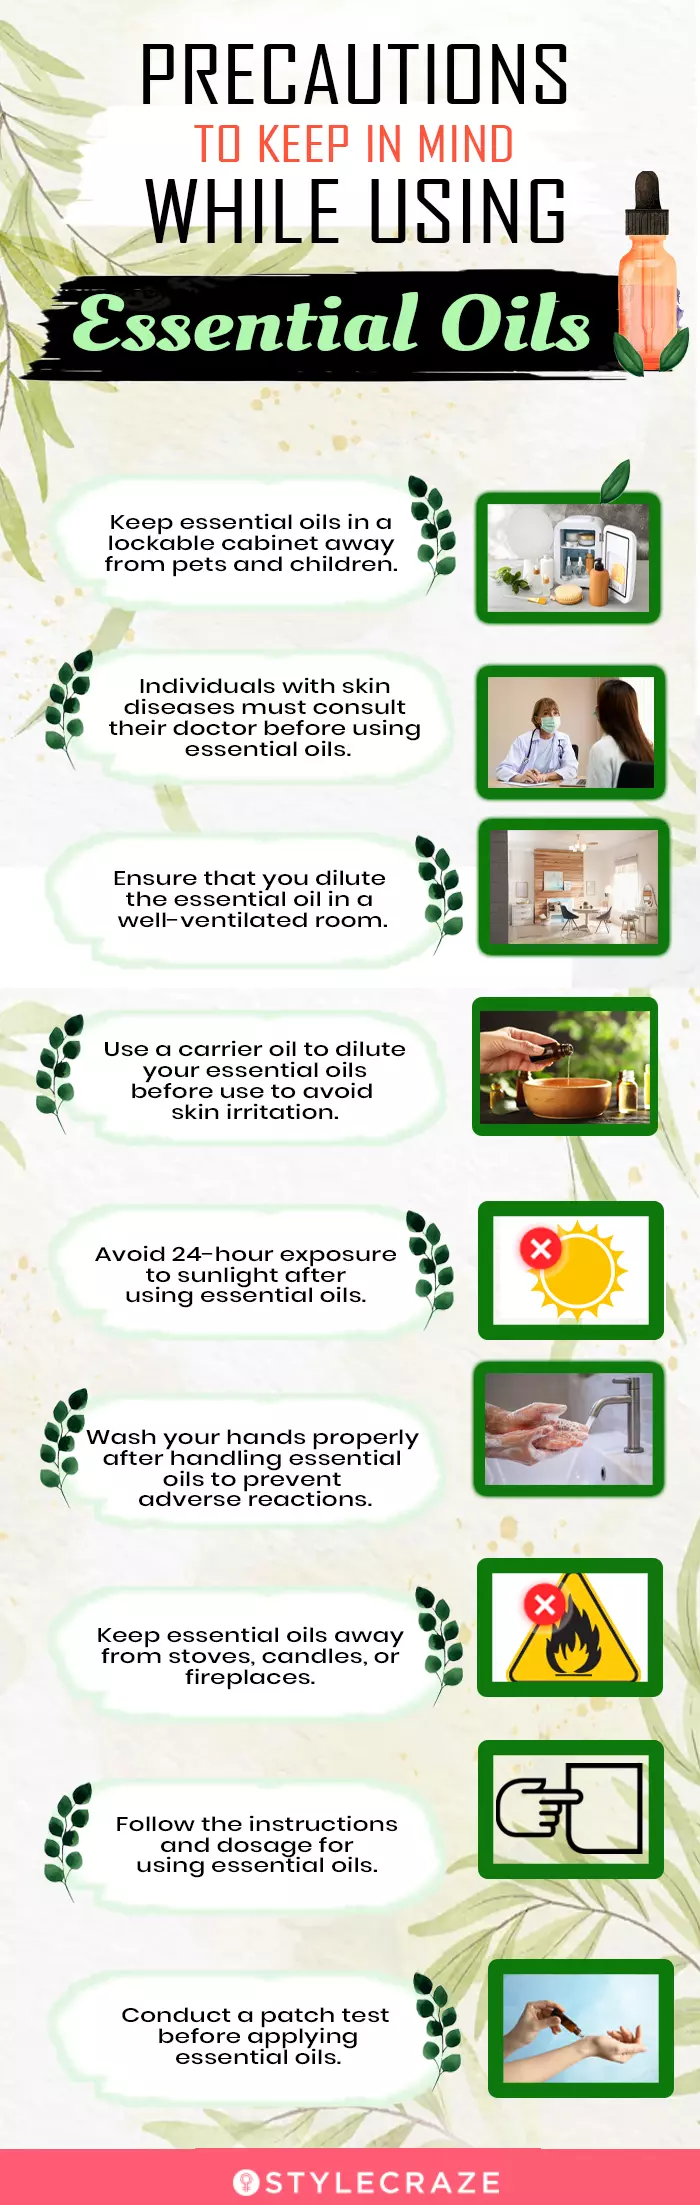 precautions to keep in mind while using essential oils [infographic]